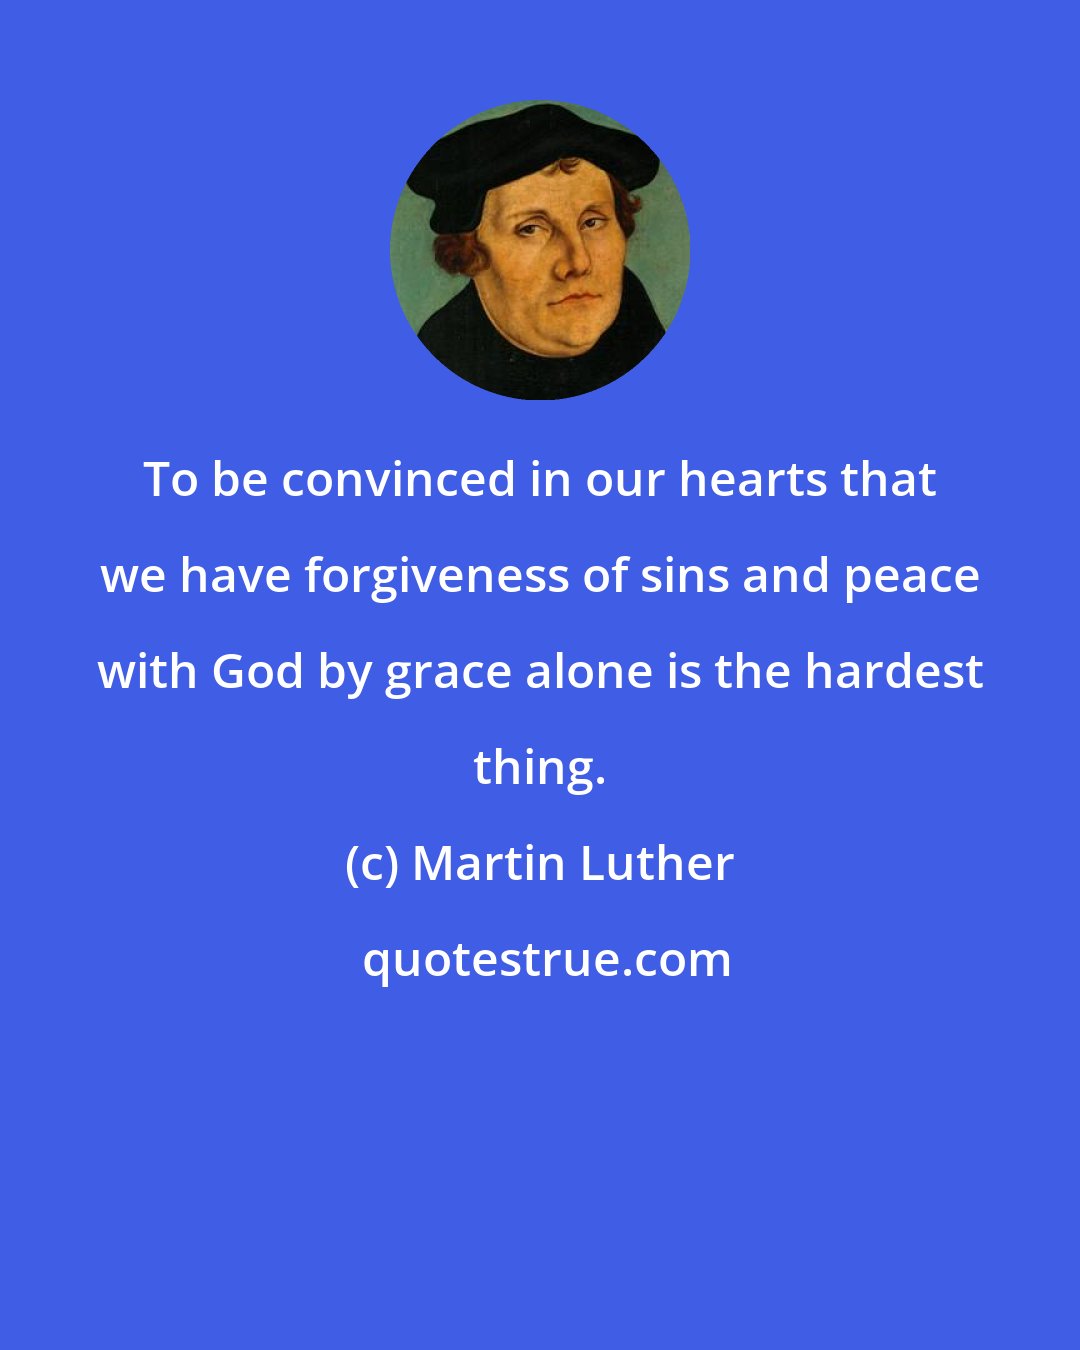 Martin Luther: To be convinced in our hearts that we have forgiveness of sins and peace with God by grace alone is the hardest thing.